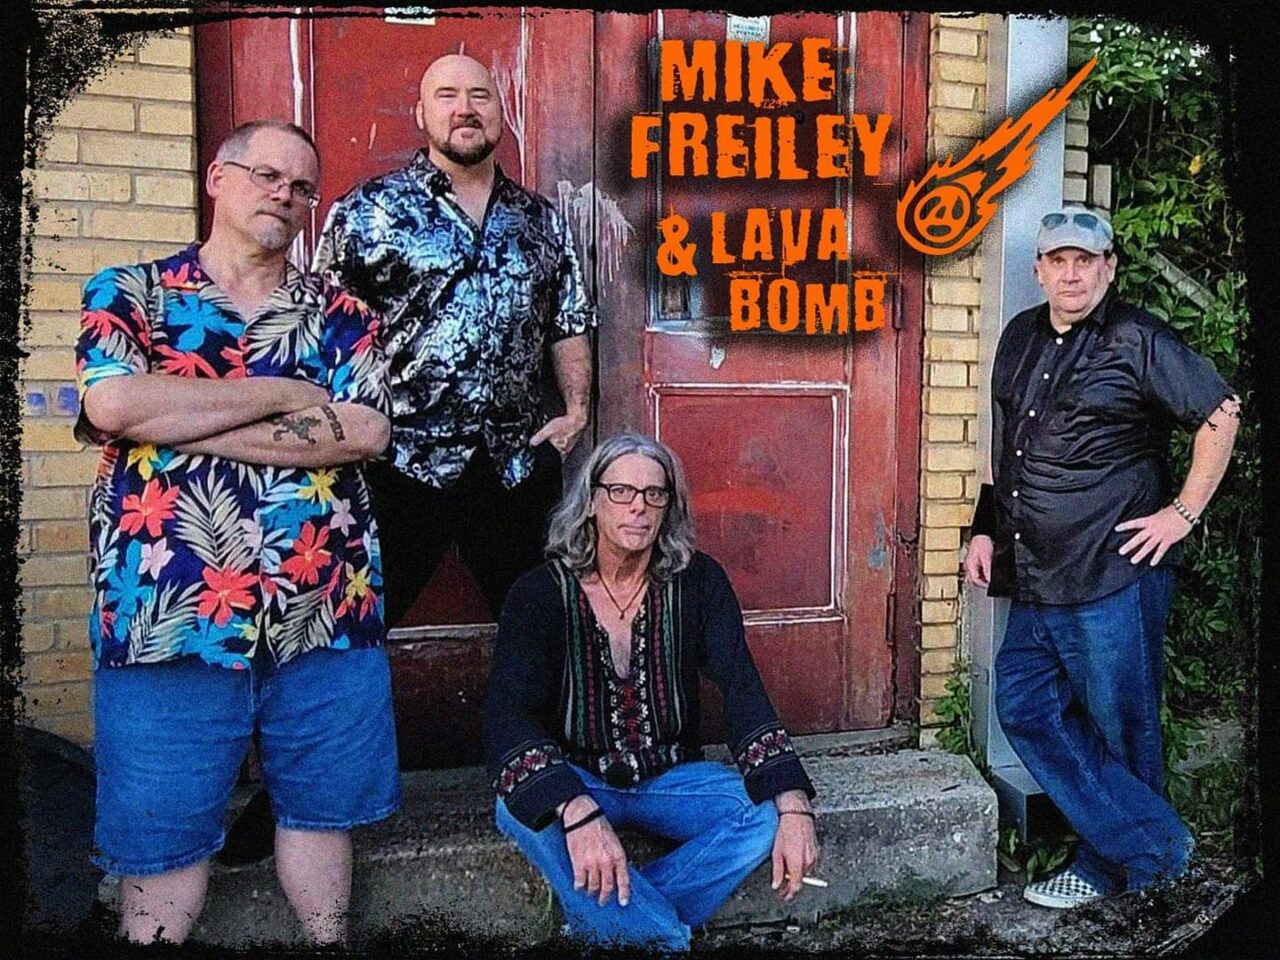 Mike Freiley and Lava Bomb at Vernon's Lakeside 2 mike frielly and lava bomb cedarcreeklake.online